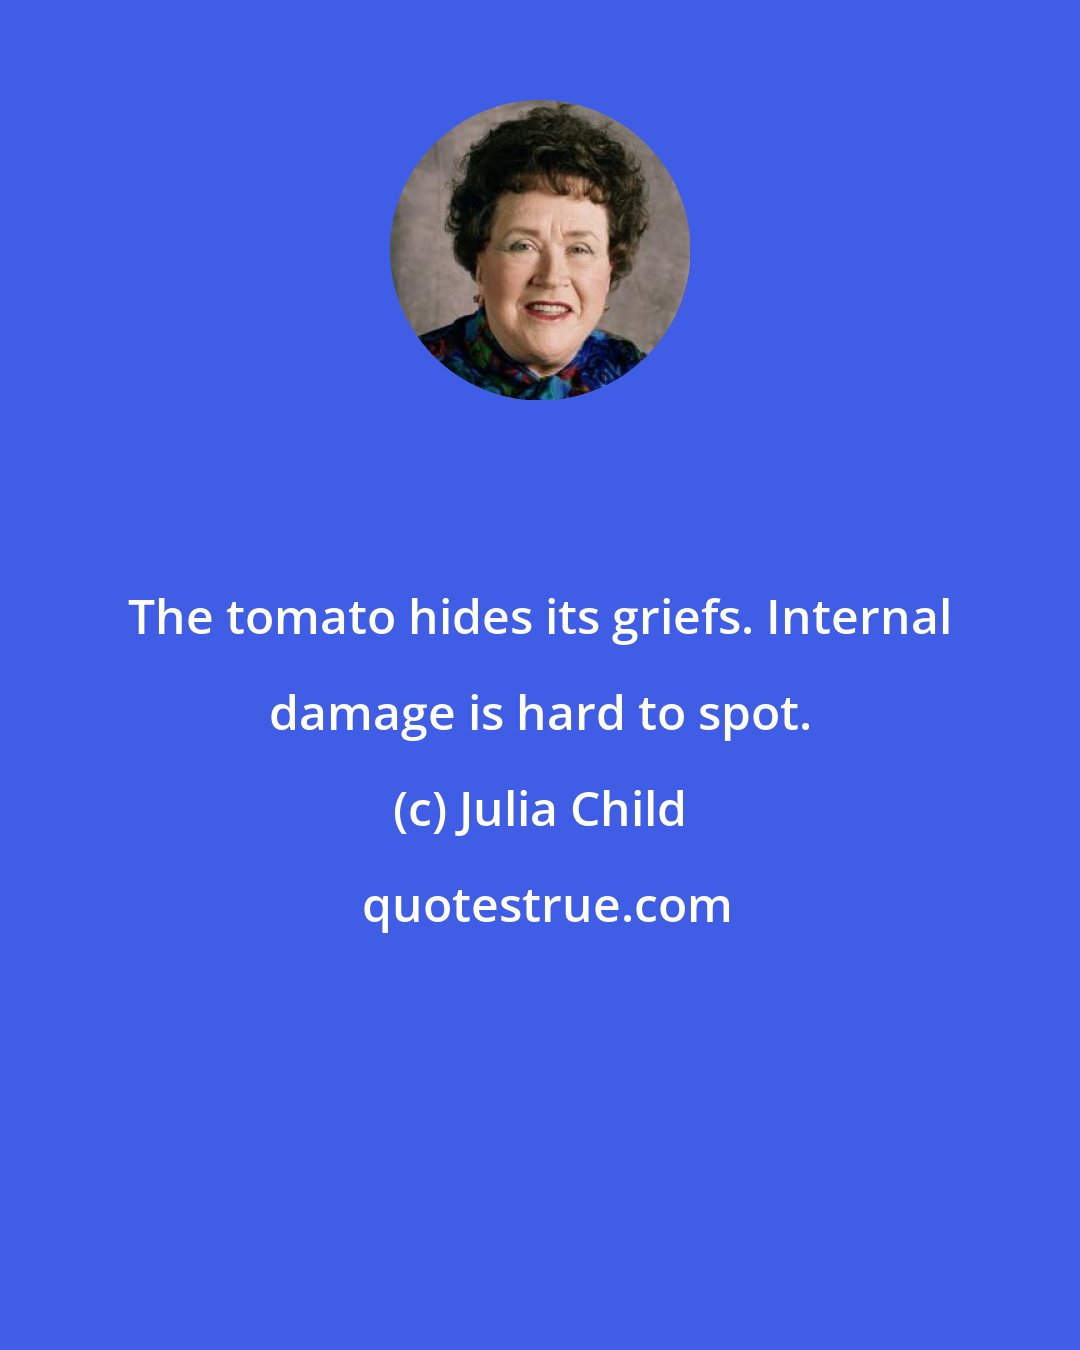 Julia Child: The tomato hides its griefs. Internal damage is hard to spot.